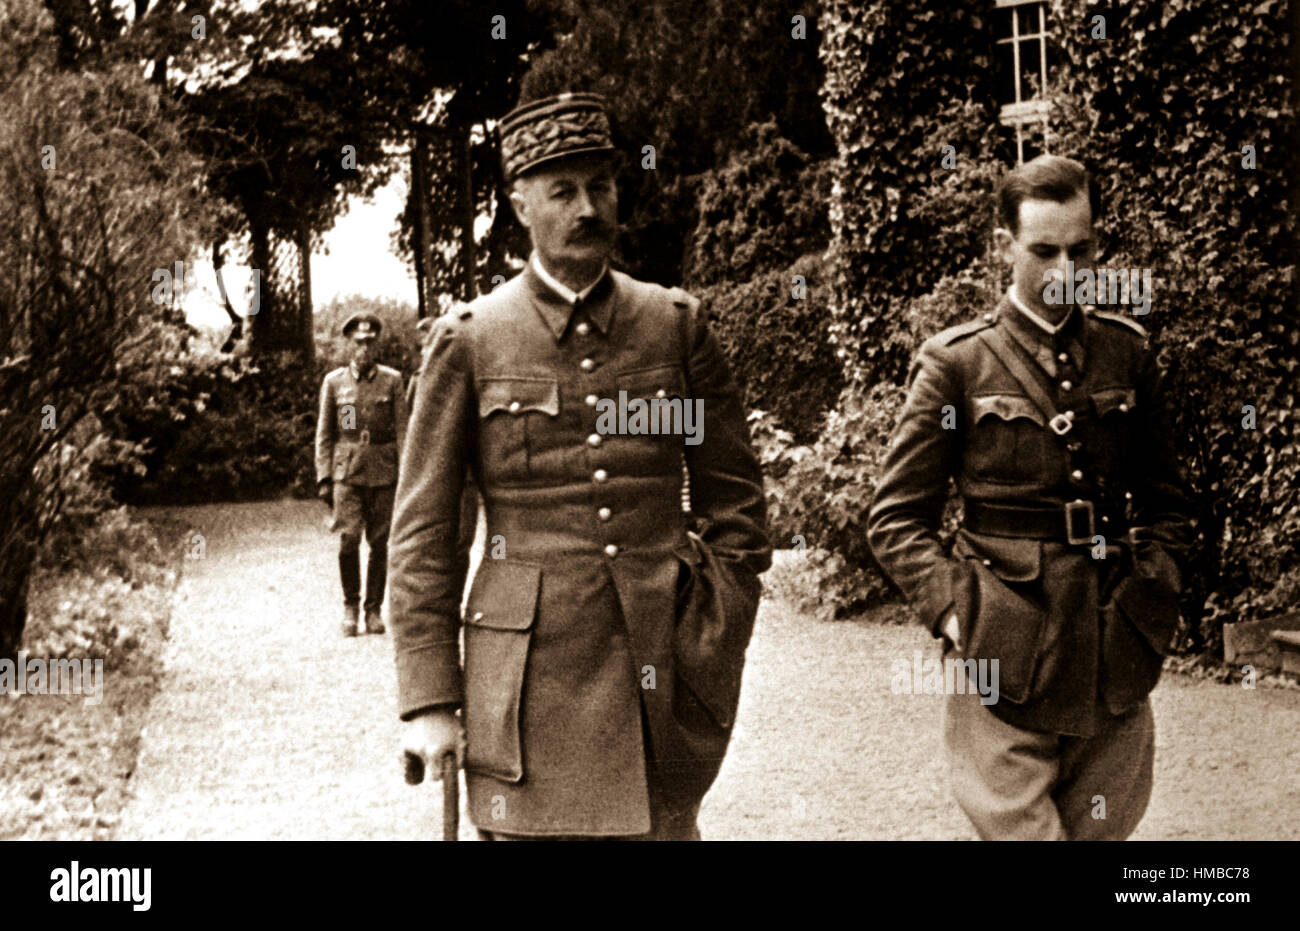 The captured French General Giraud, during his daily walk.  Germany, ca. 1940-41. Stock Photo